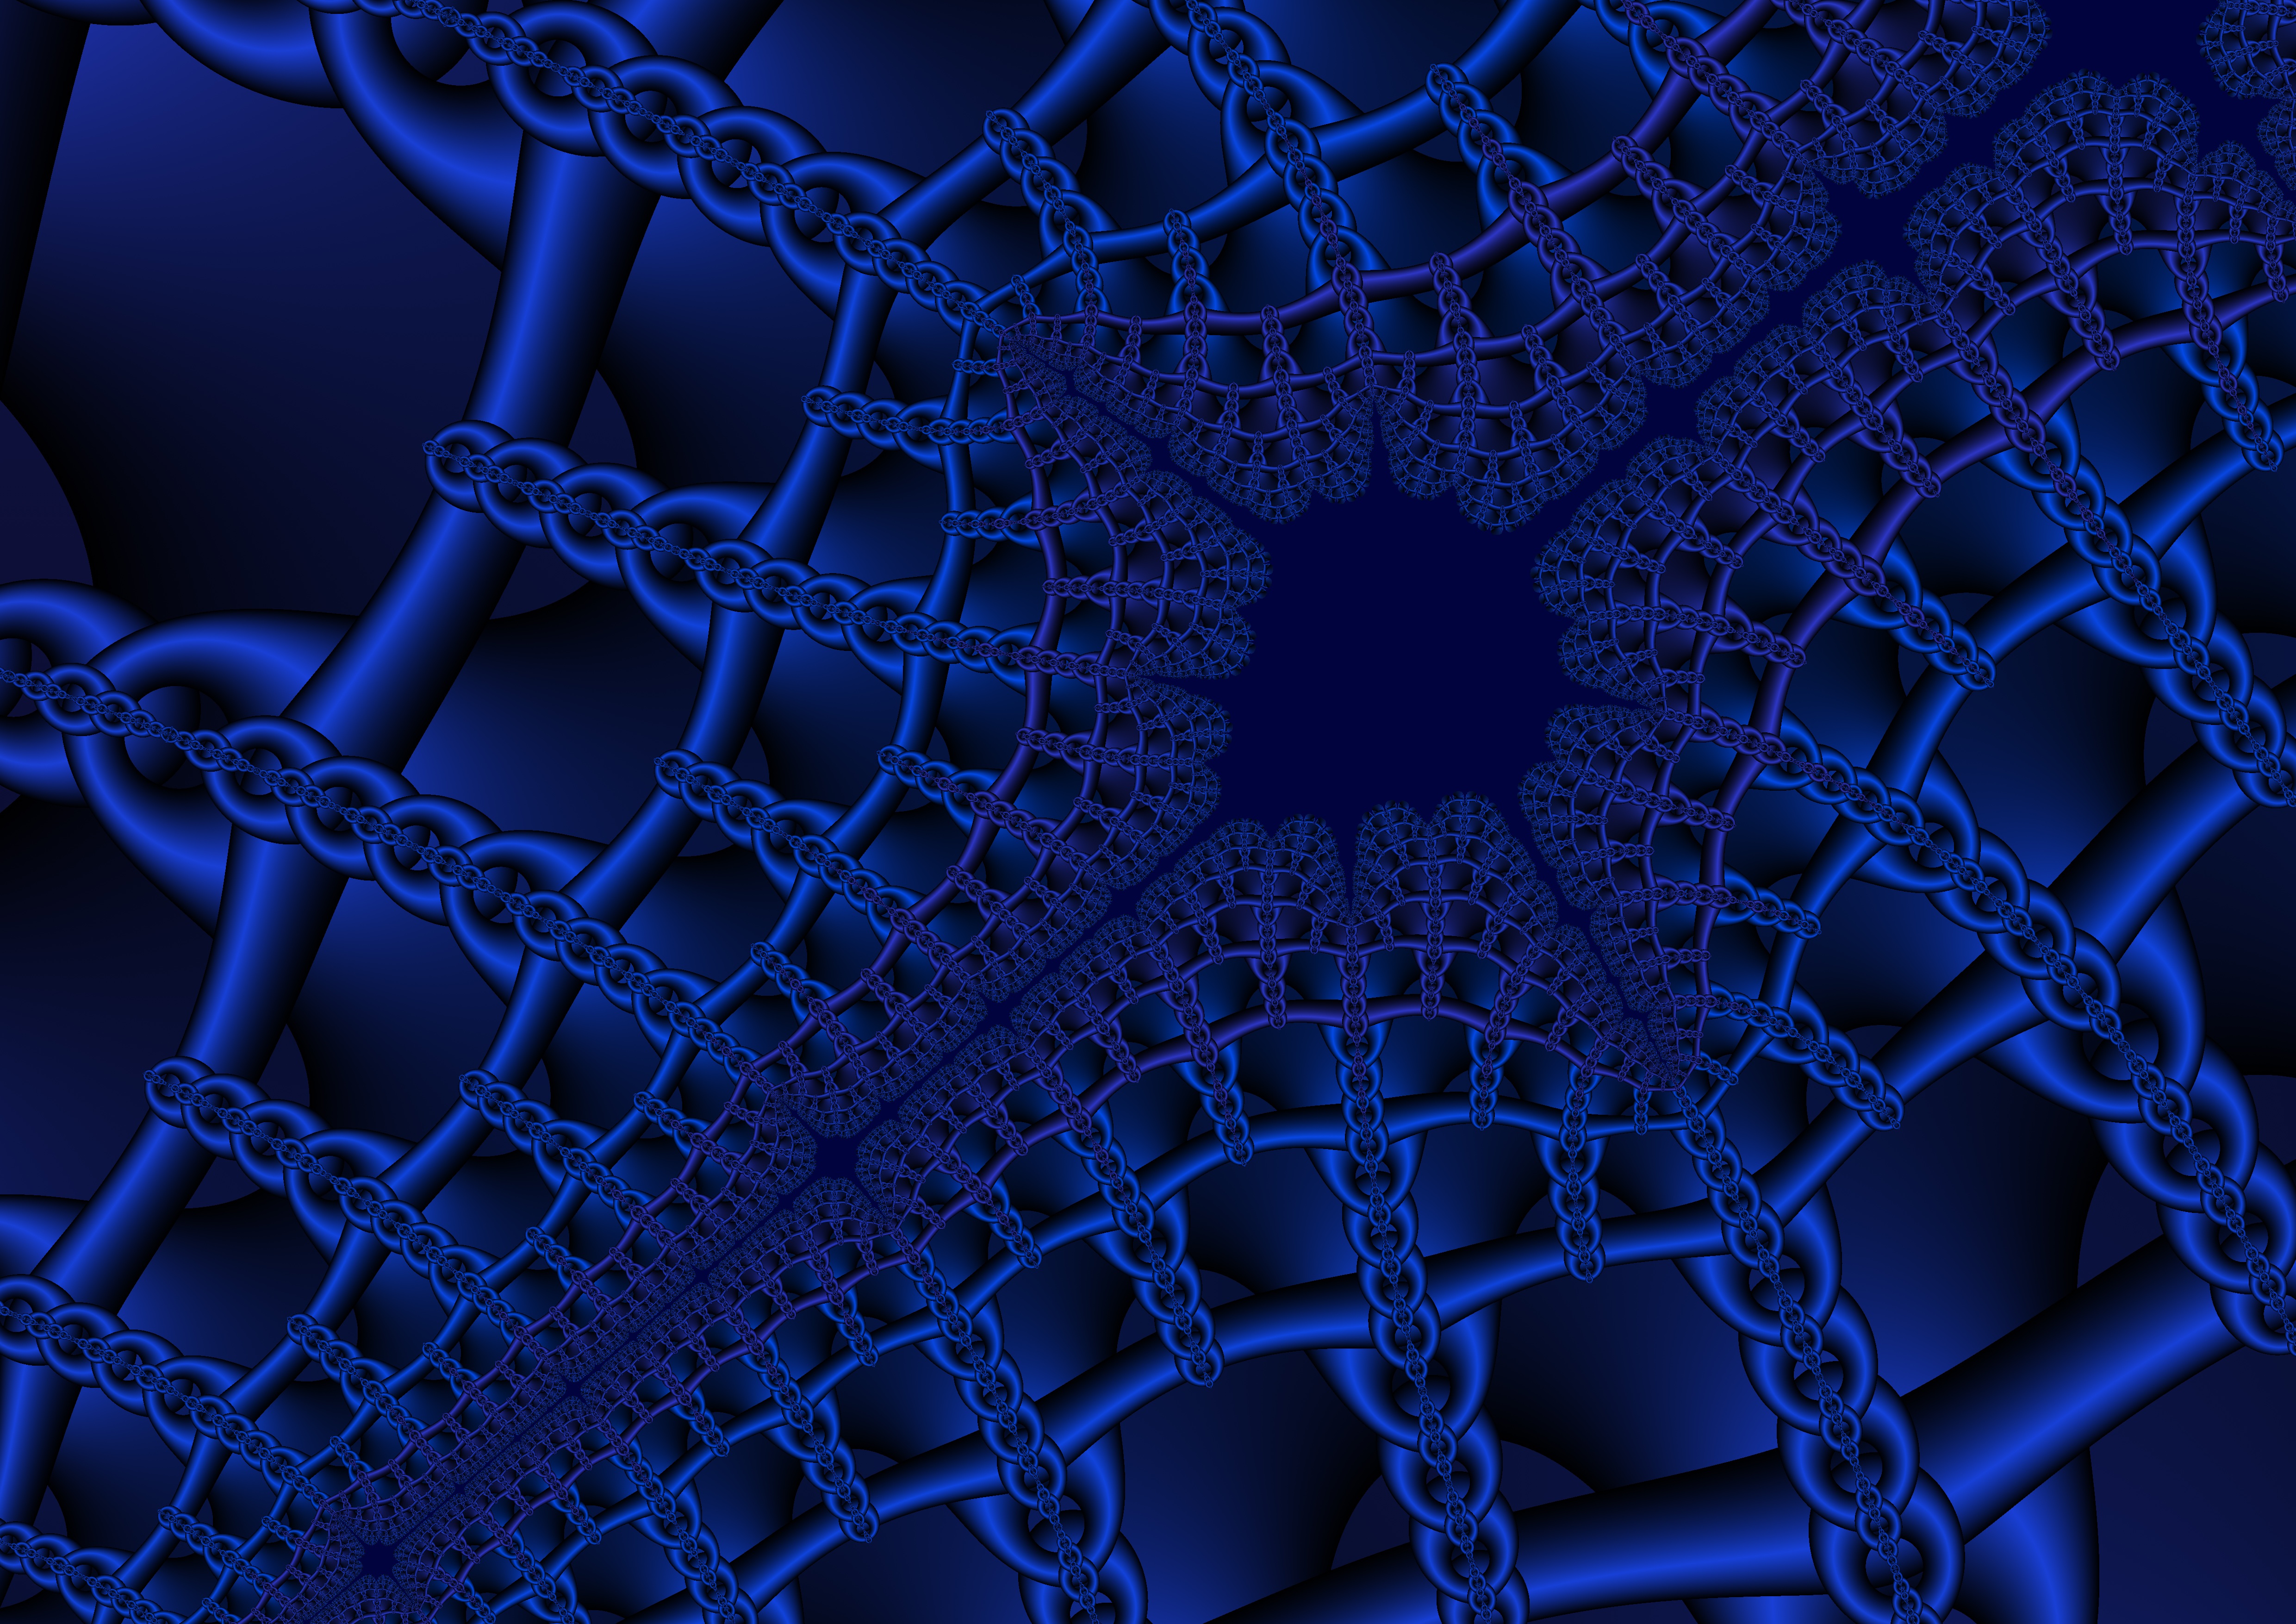 3d, abstract, pattern, fractal, chain, net, chaotic, computer graphics